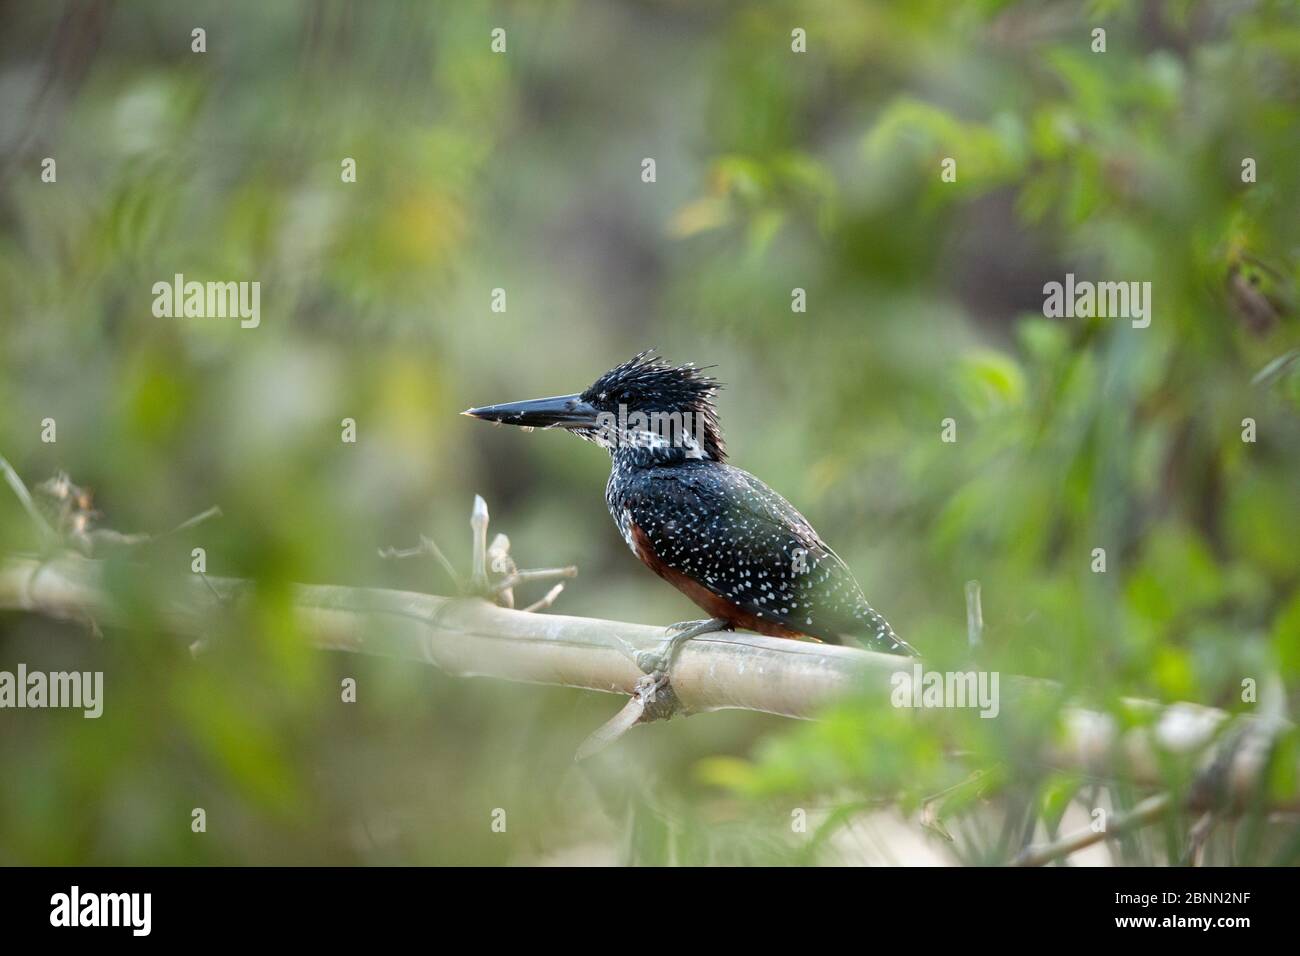 Giant kingfisher (Megaceryle maxima) perched on a branch, Gambia, Africa, April 2016 Stock Photo